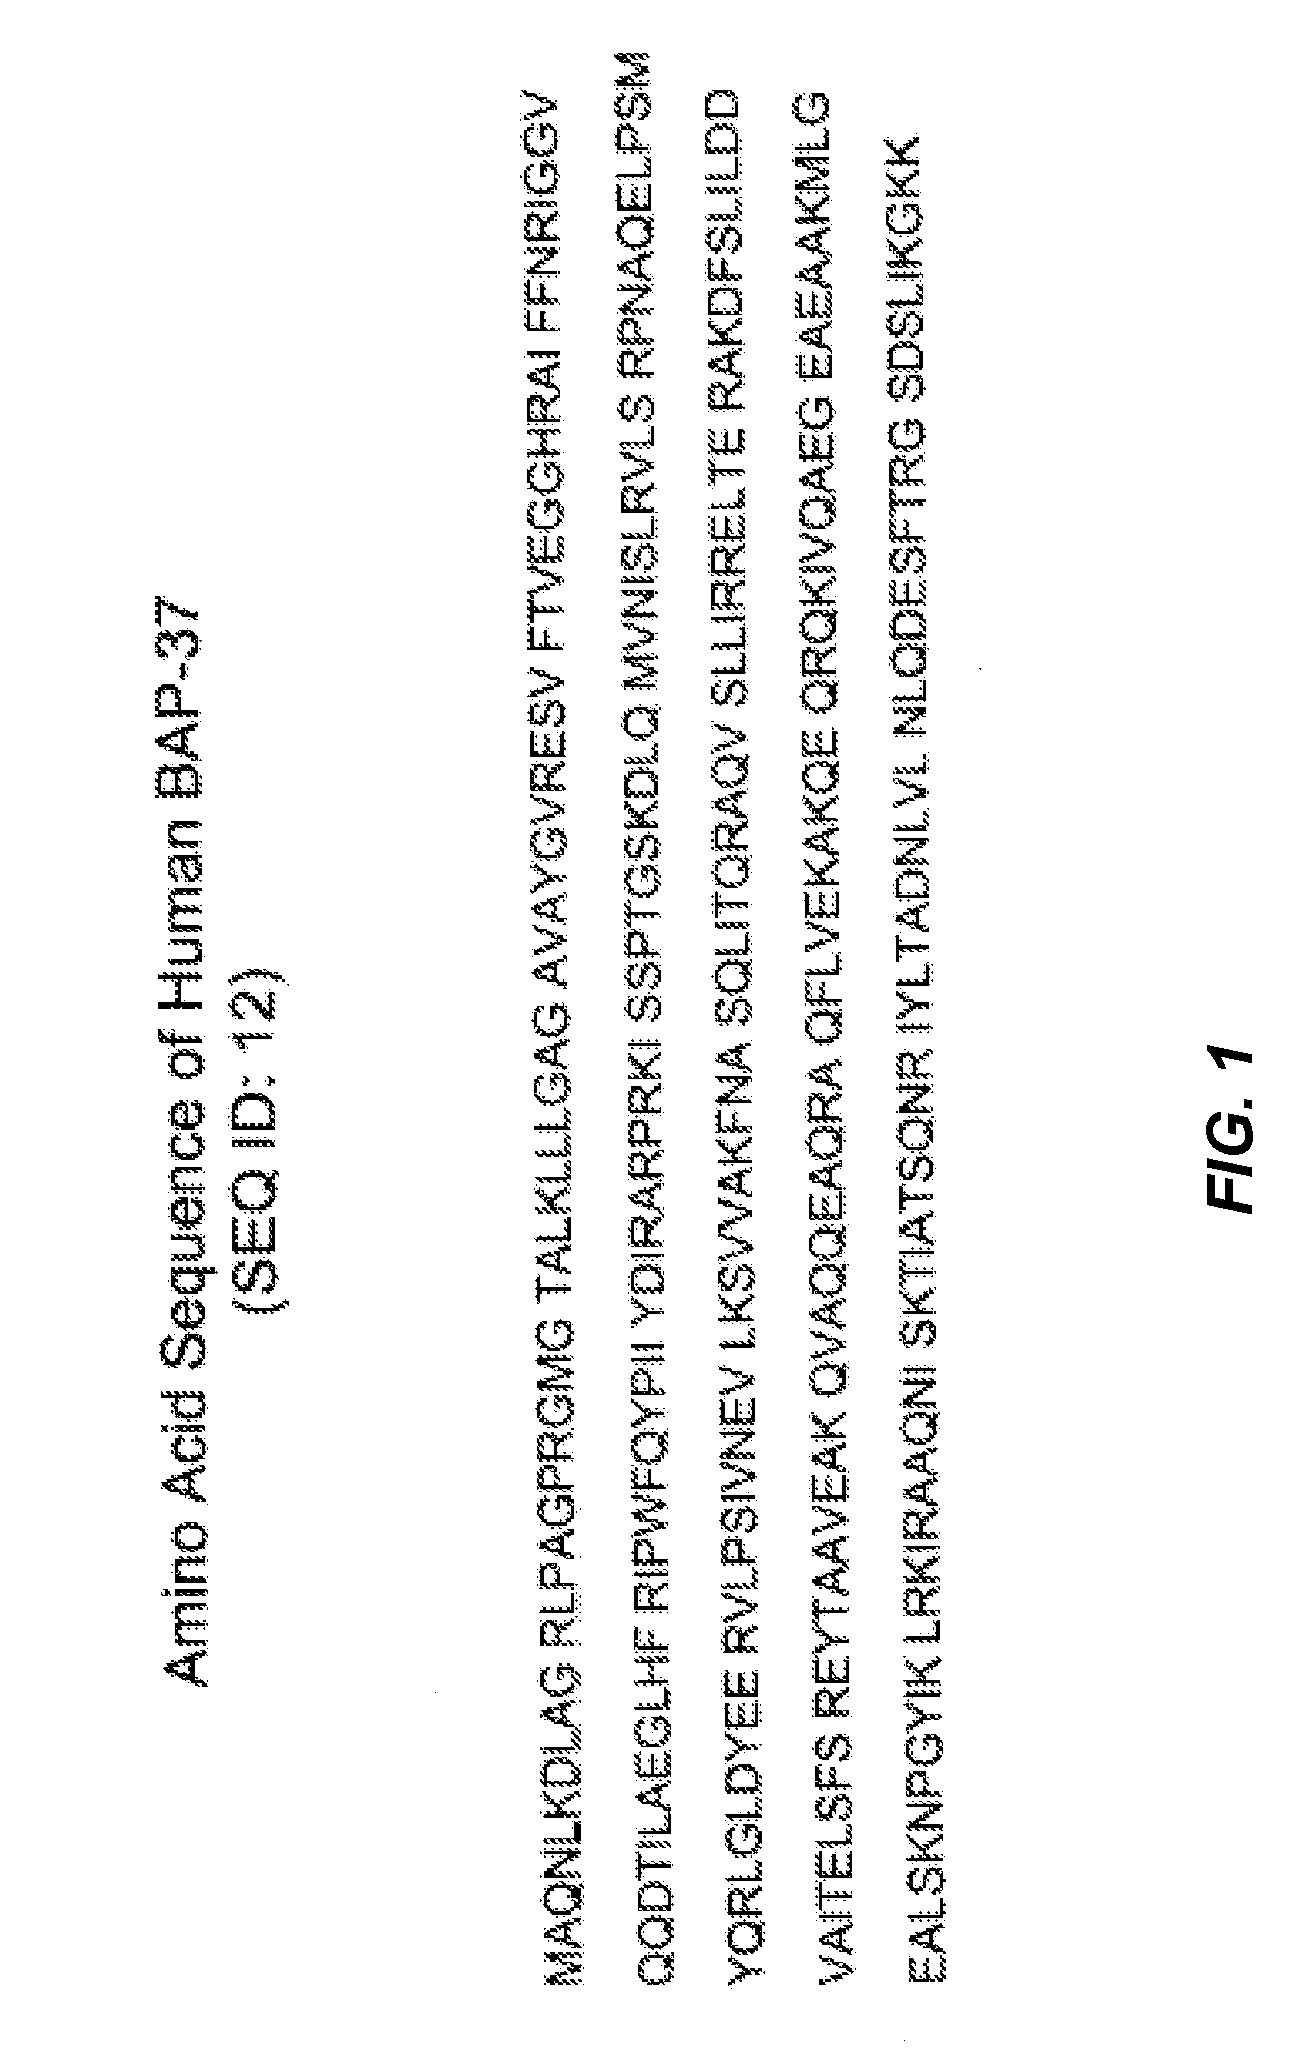 Methods of Identifying Compounds that Modulate IL-4 Receptor-Mediated IgE Synthesis Utilizing a B-Cell Associated Protein